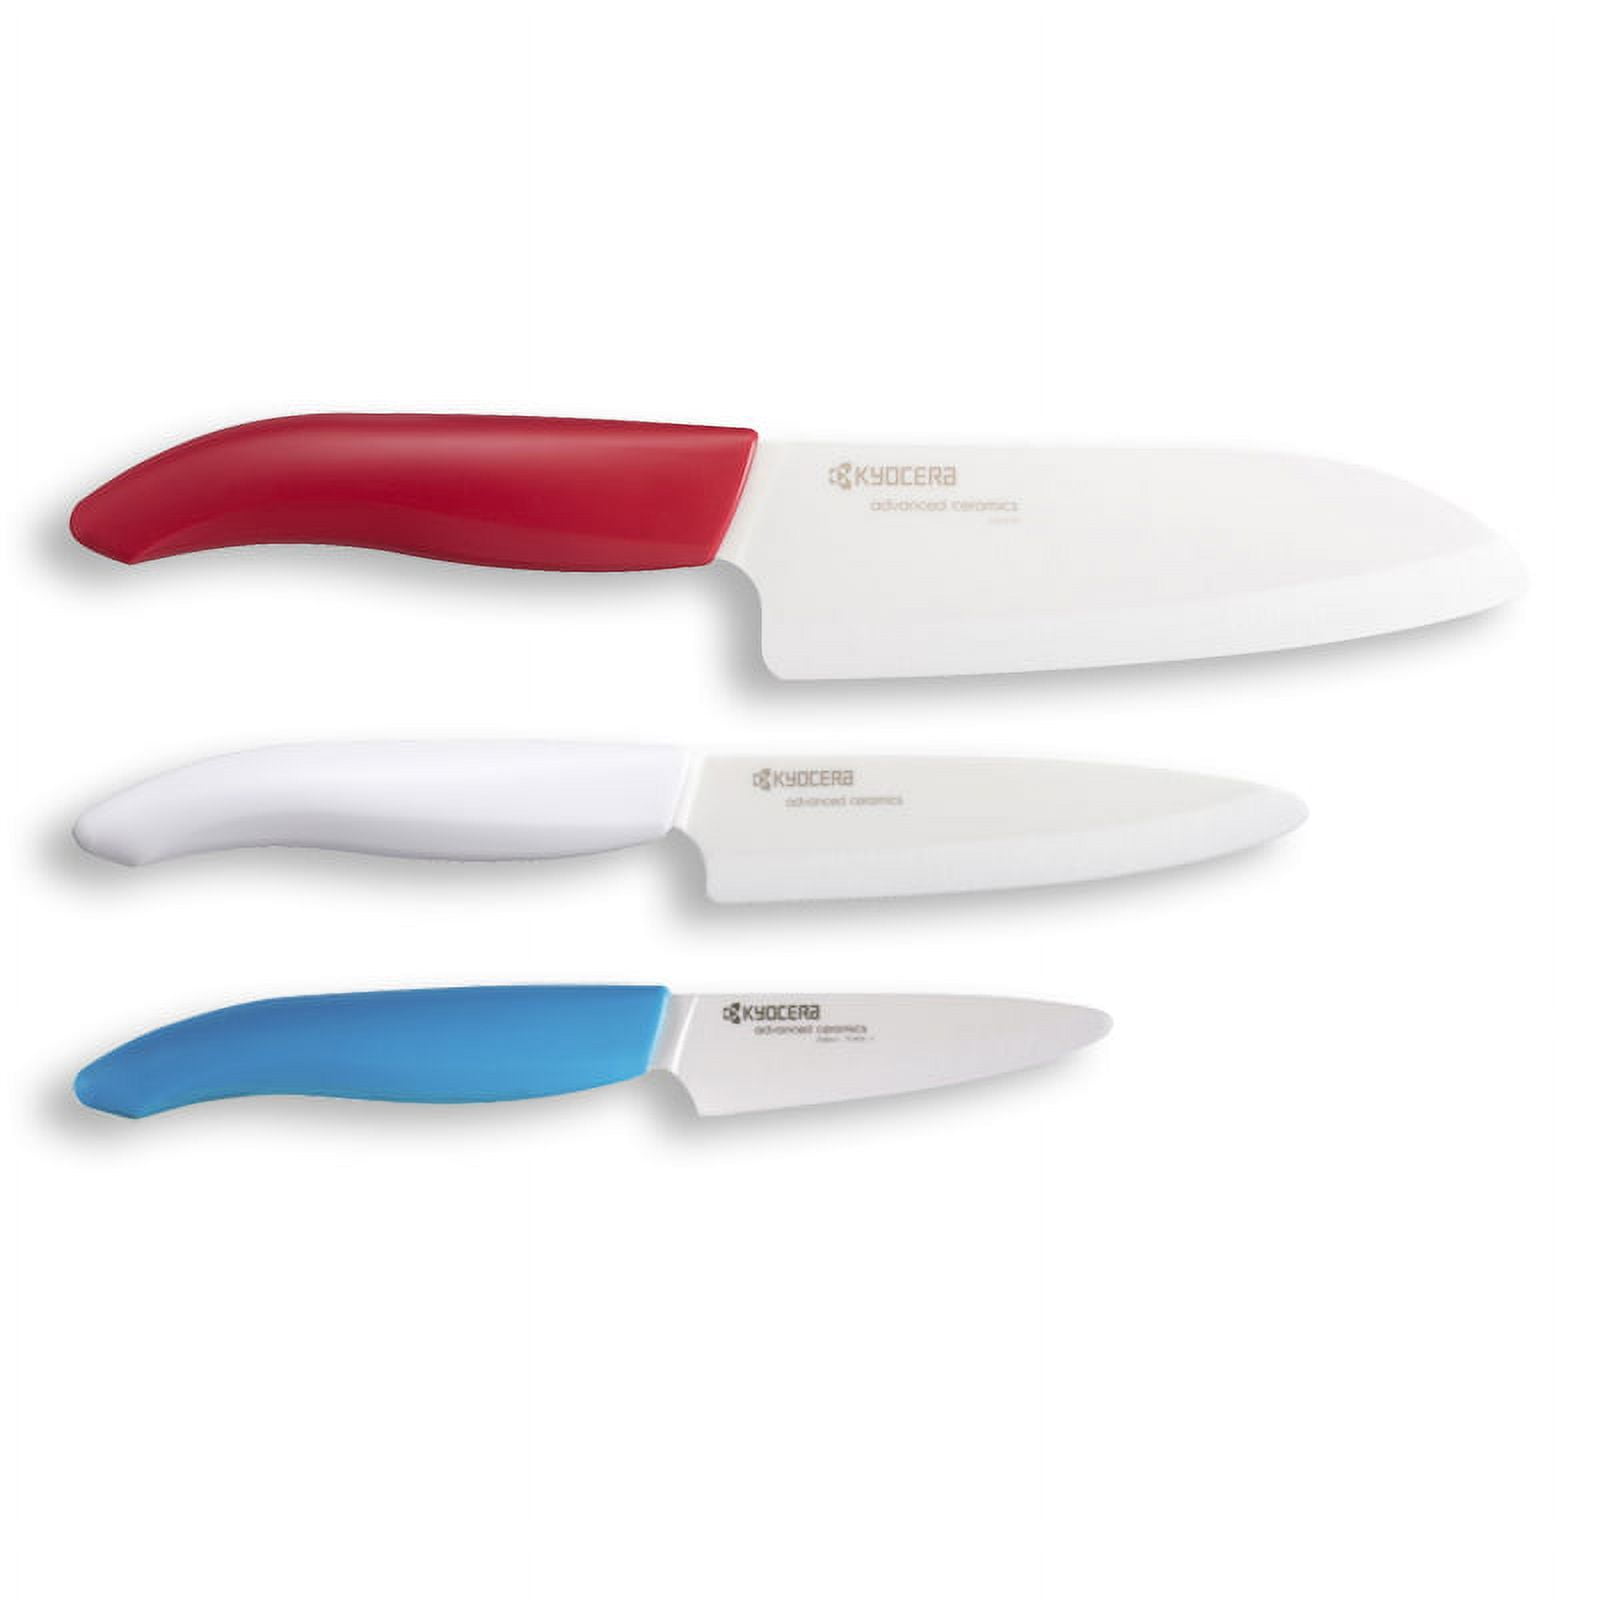 KYOCERA > Knife sheaths and edge guard to protect your kitchen knives